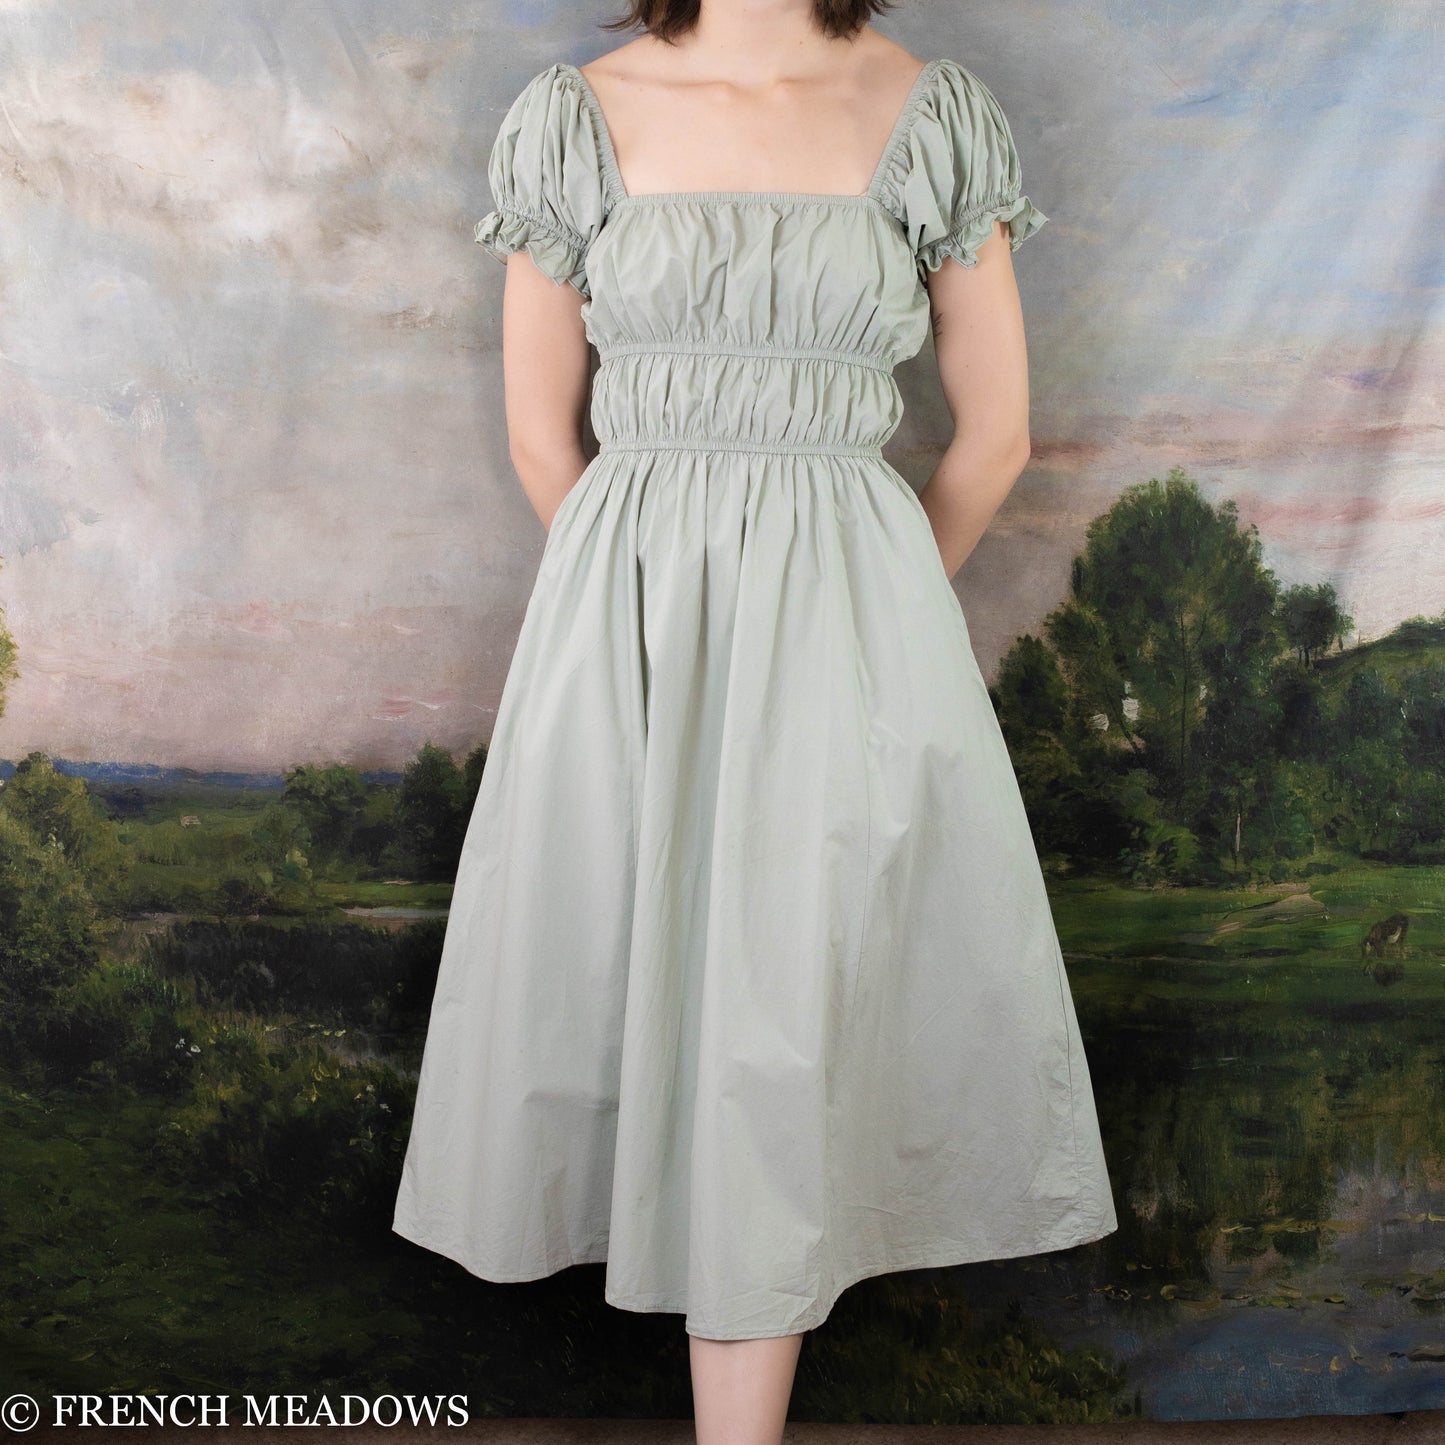 modeling wearing a green cottage core dress with waist rouching